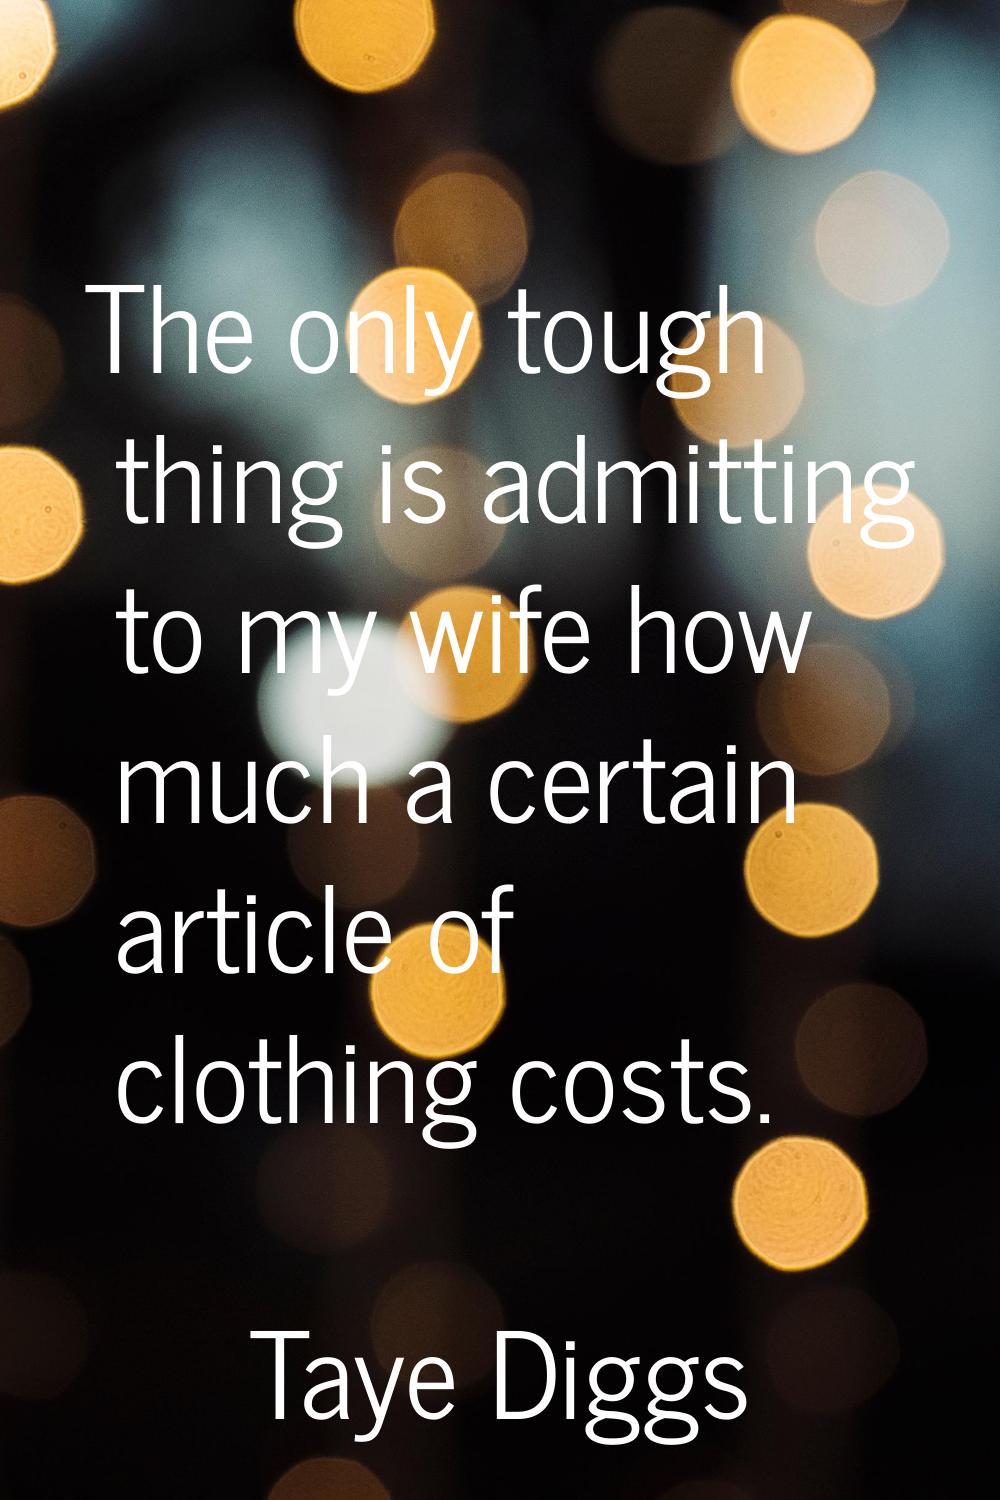 The only tough thing is admitting to my wife how much a certain article of clothing costs.